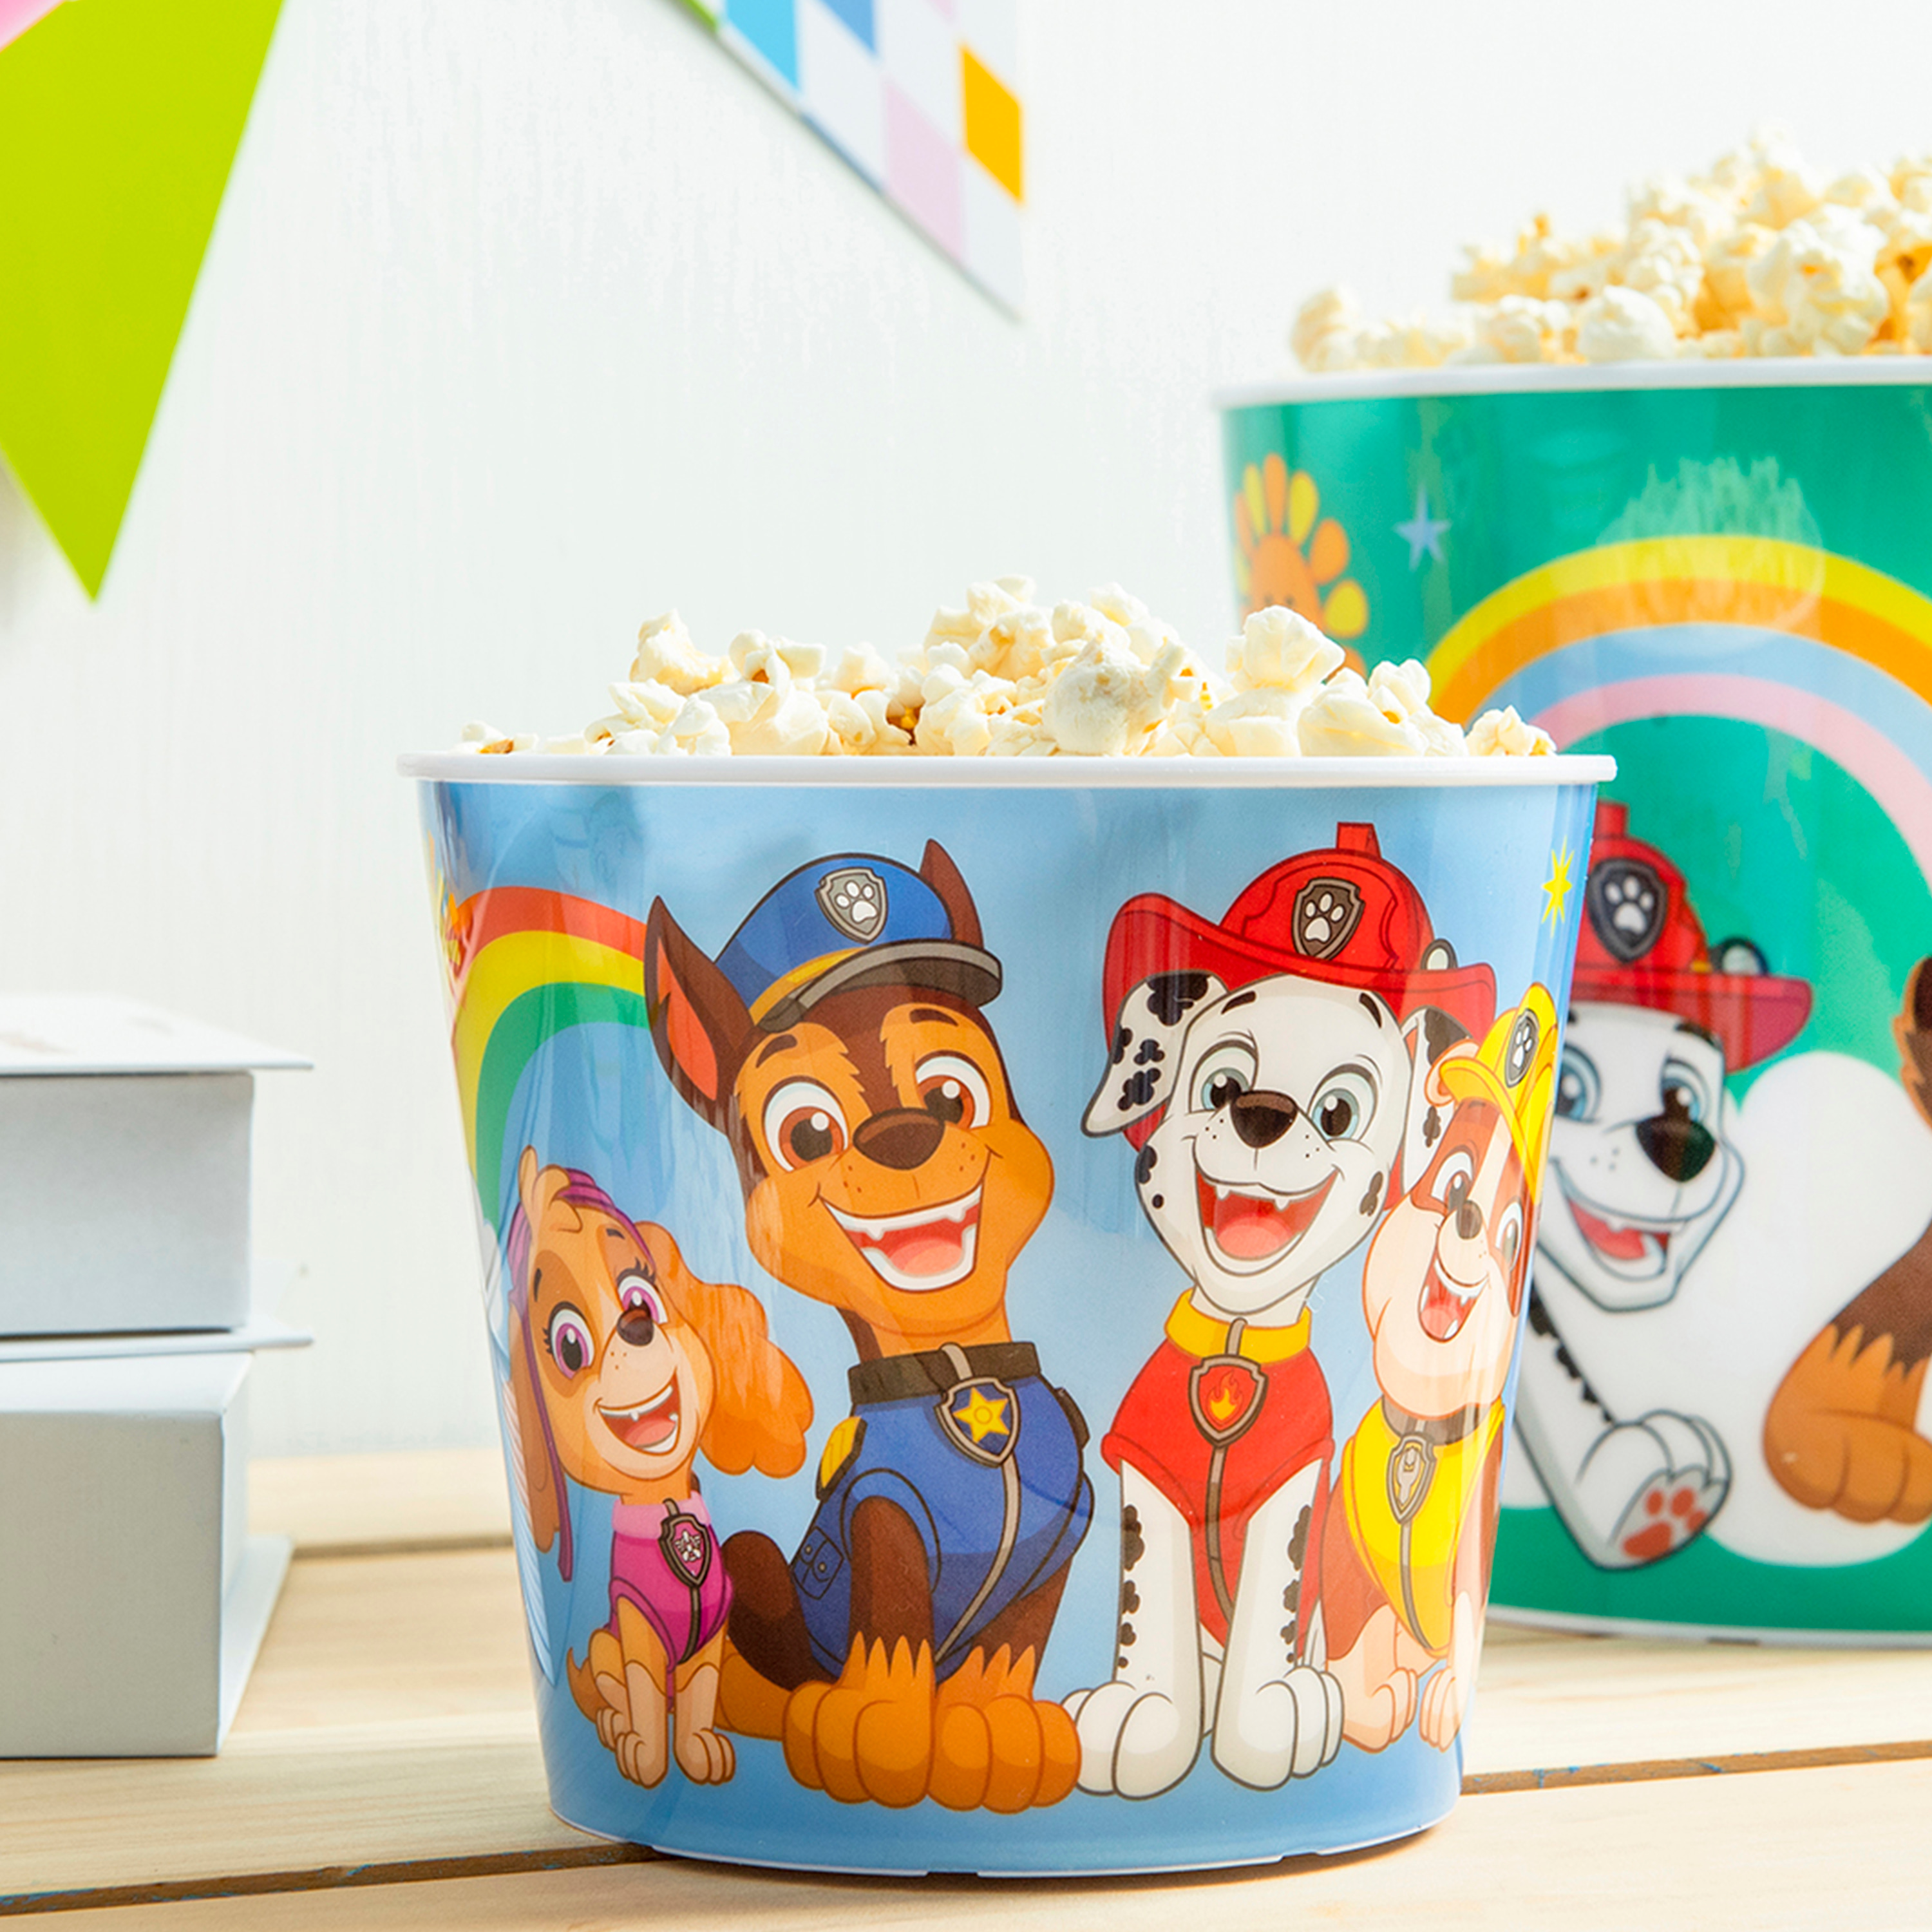 Paw Patrol Plastic Popcorn Container and Bowls, Chase, Marshall and Friends, 5-piece set slideshow image 3